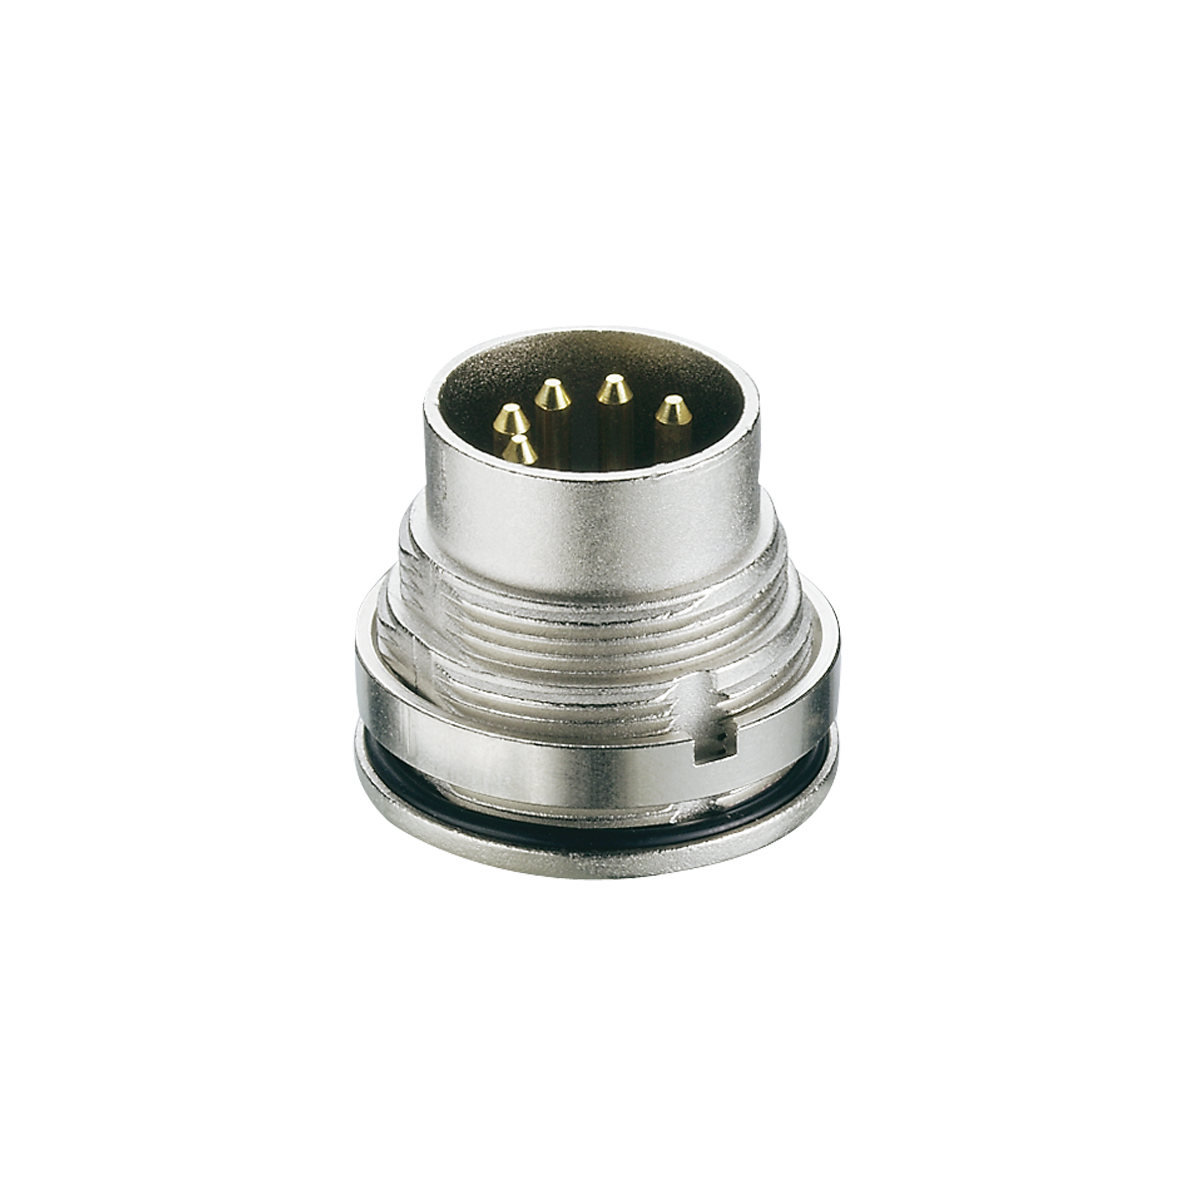 Lumberg: 315 (Series 03 | Circular connectors with threaded joint M16 acc. to IEC 61076-2-106, IP40/IP68)